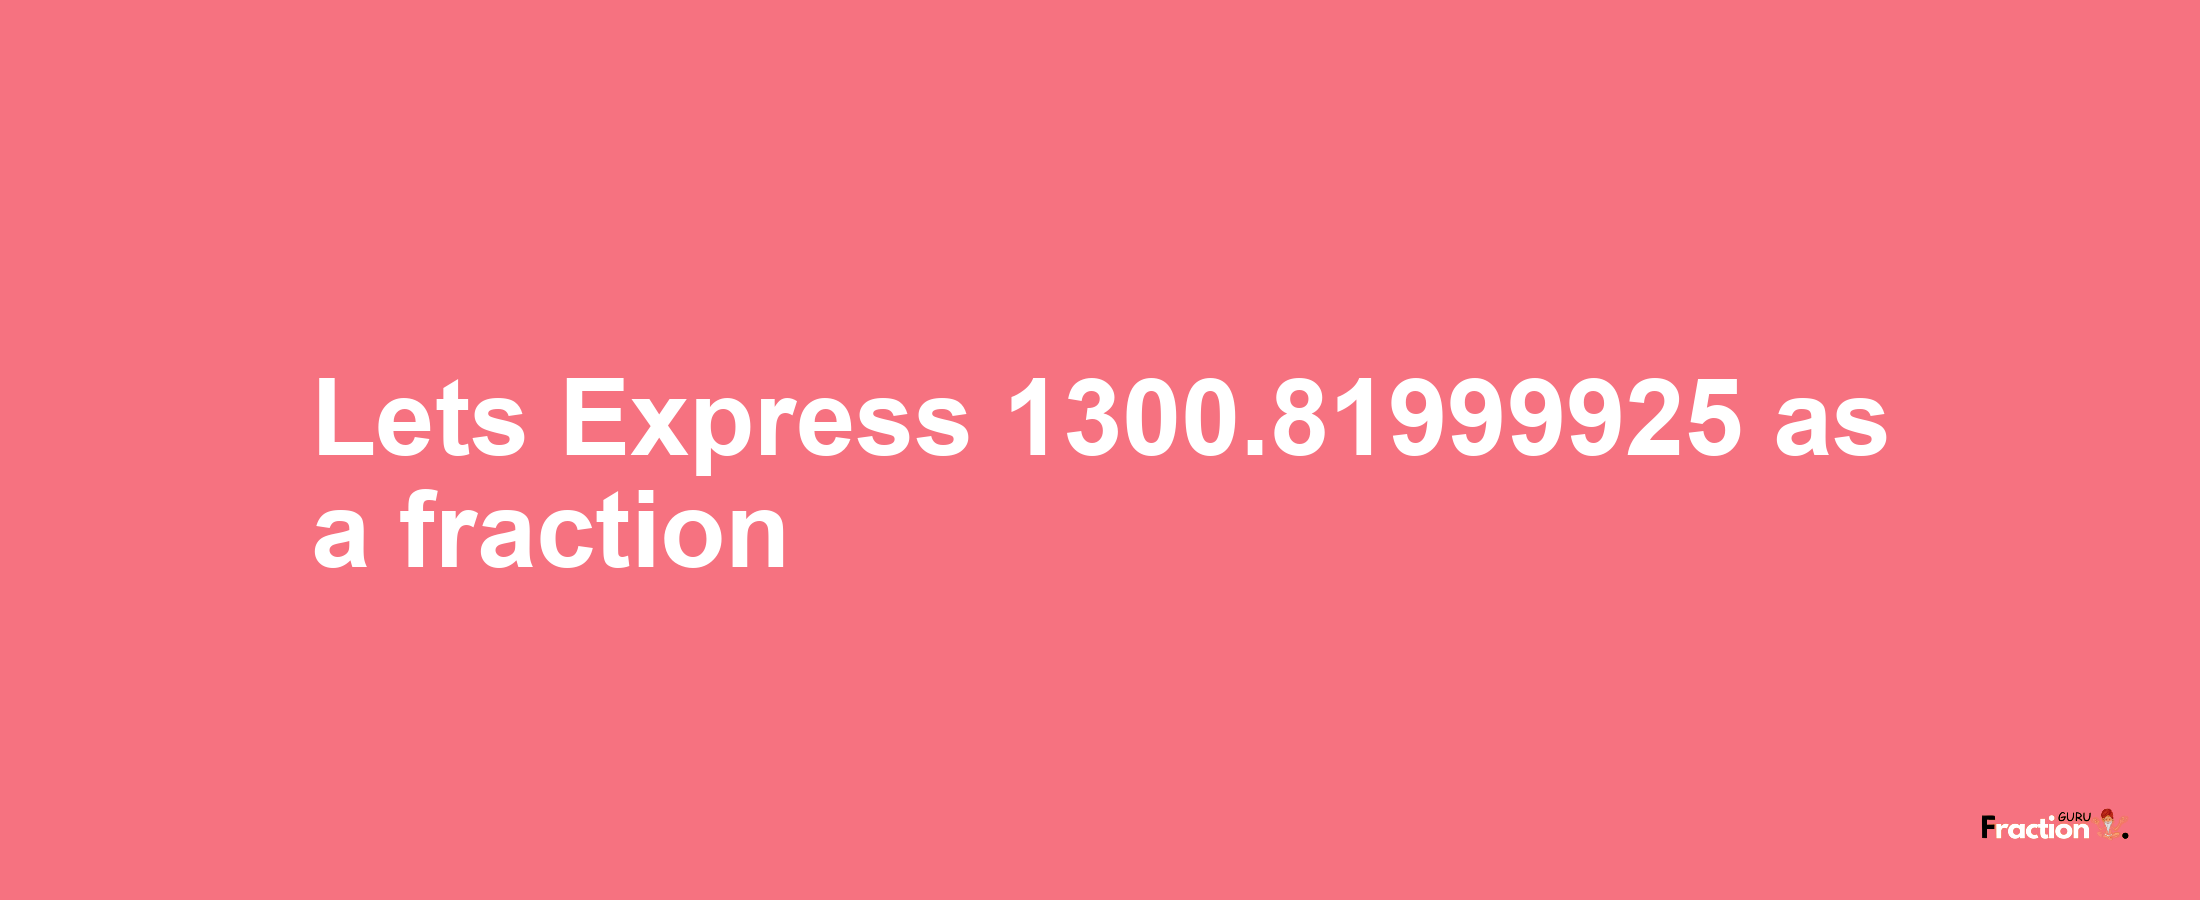 Lets Express 1300.81999925 as afraction